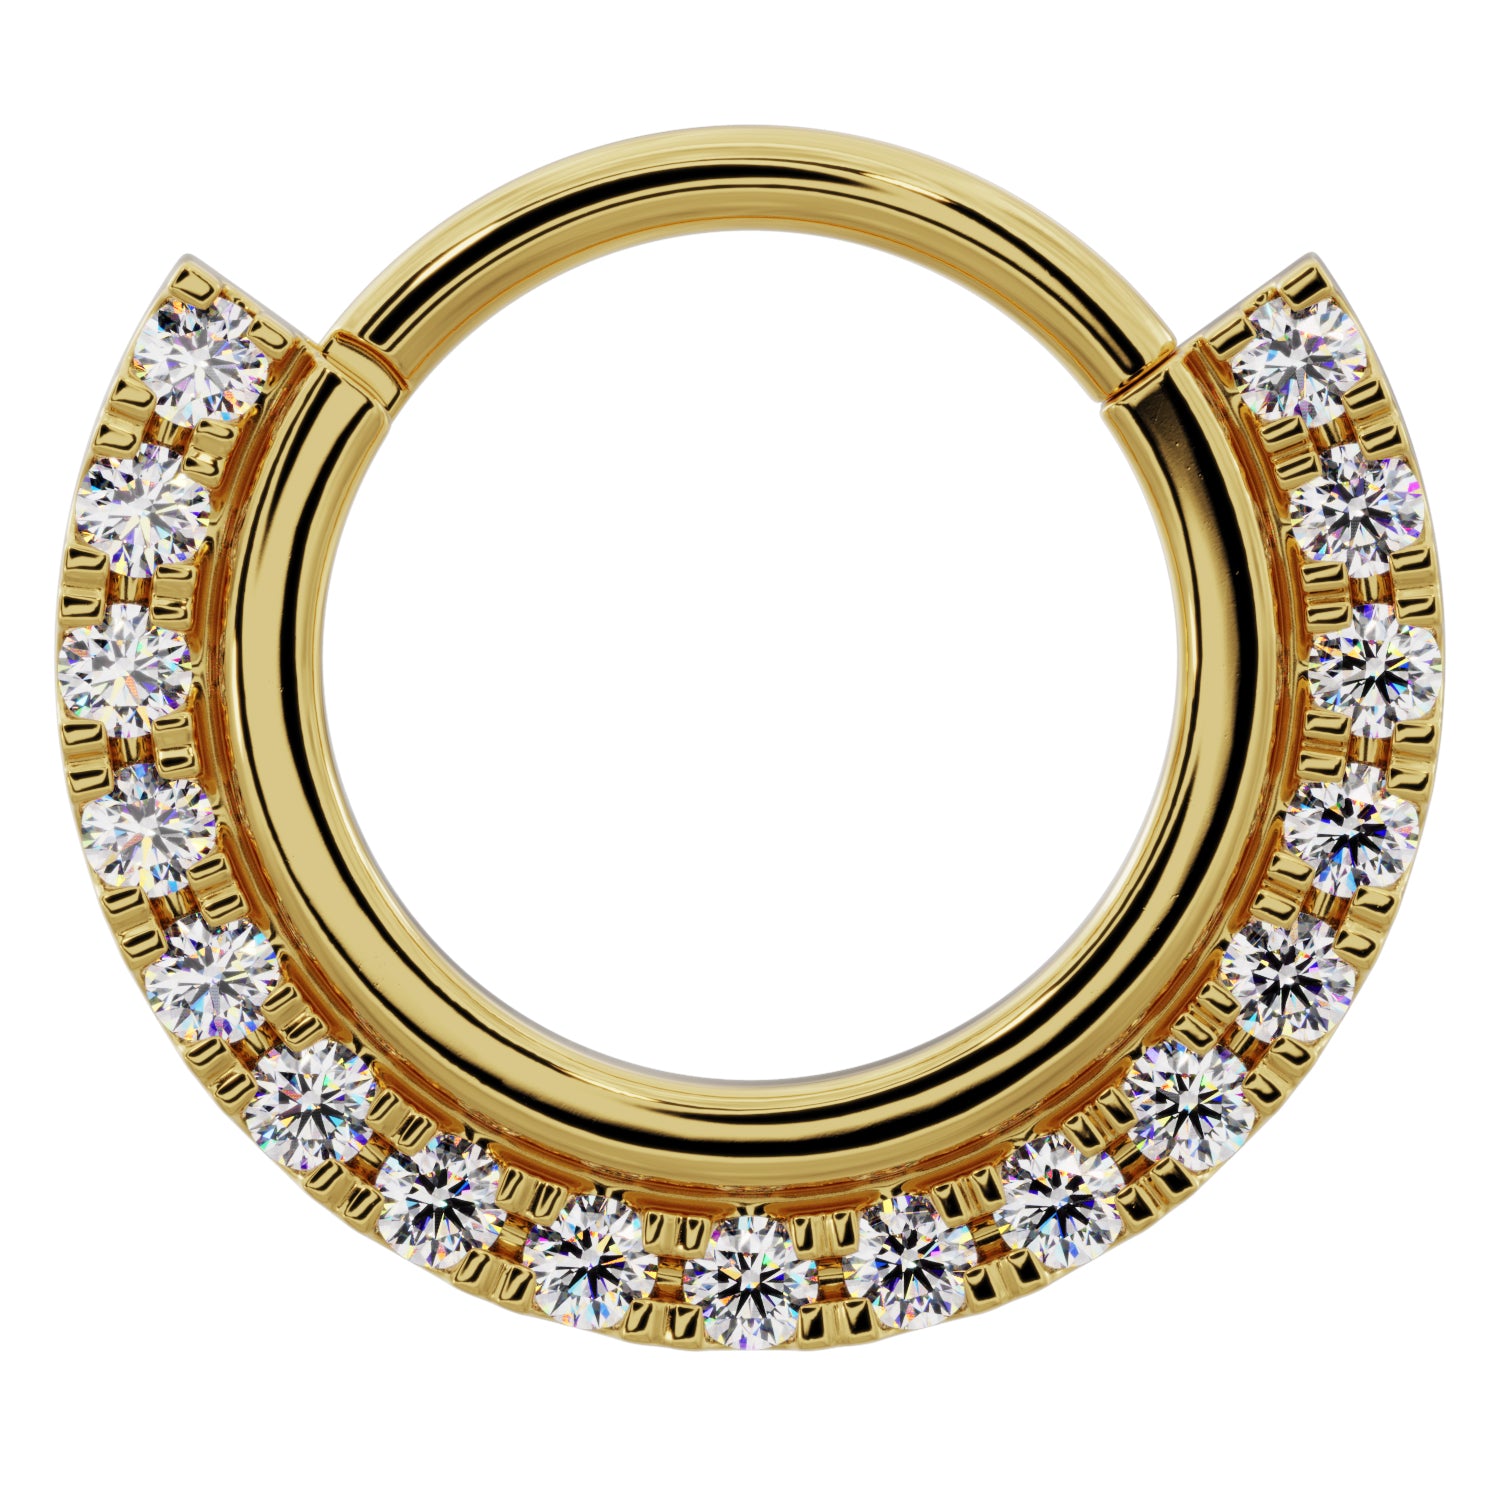 Gold Band and Diamonds Clicker 14k Gold Clicker Ring Hoop-14K Yellow Gold   14G (1.6mm)   5 8